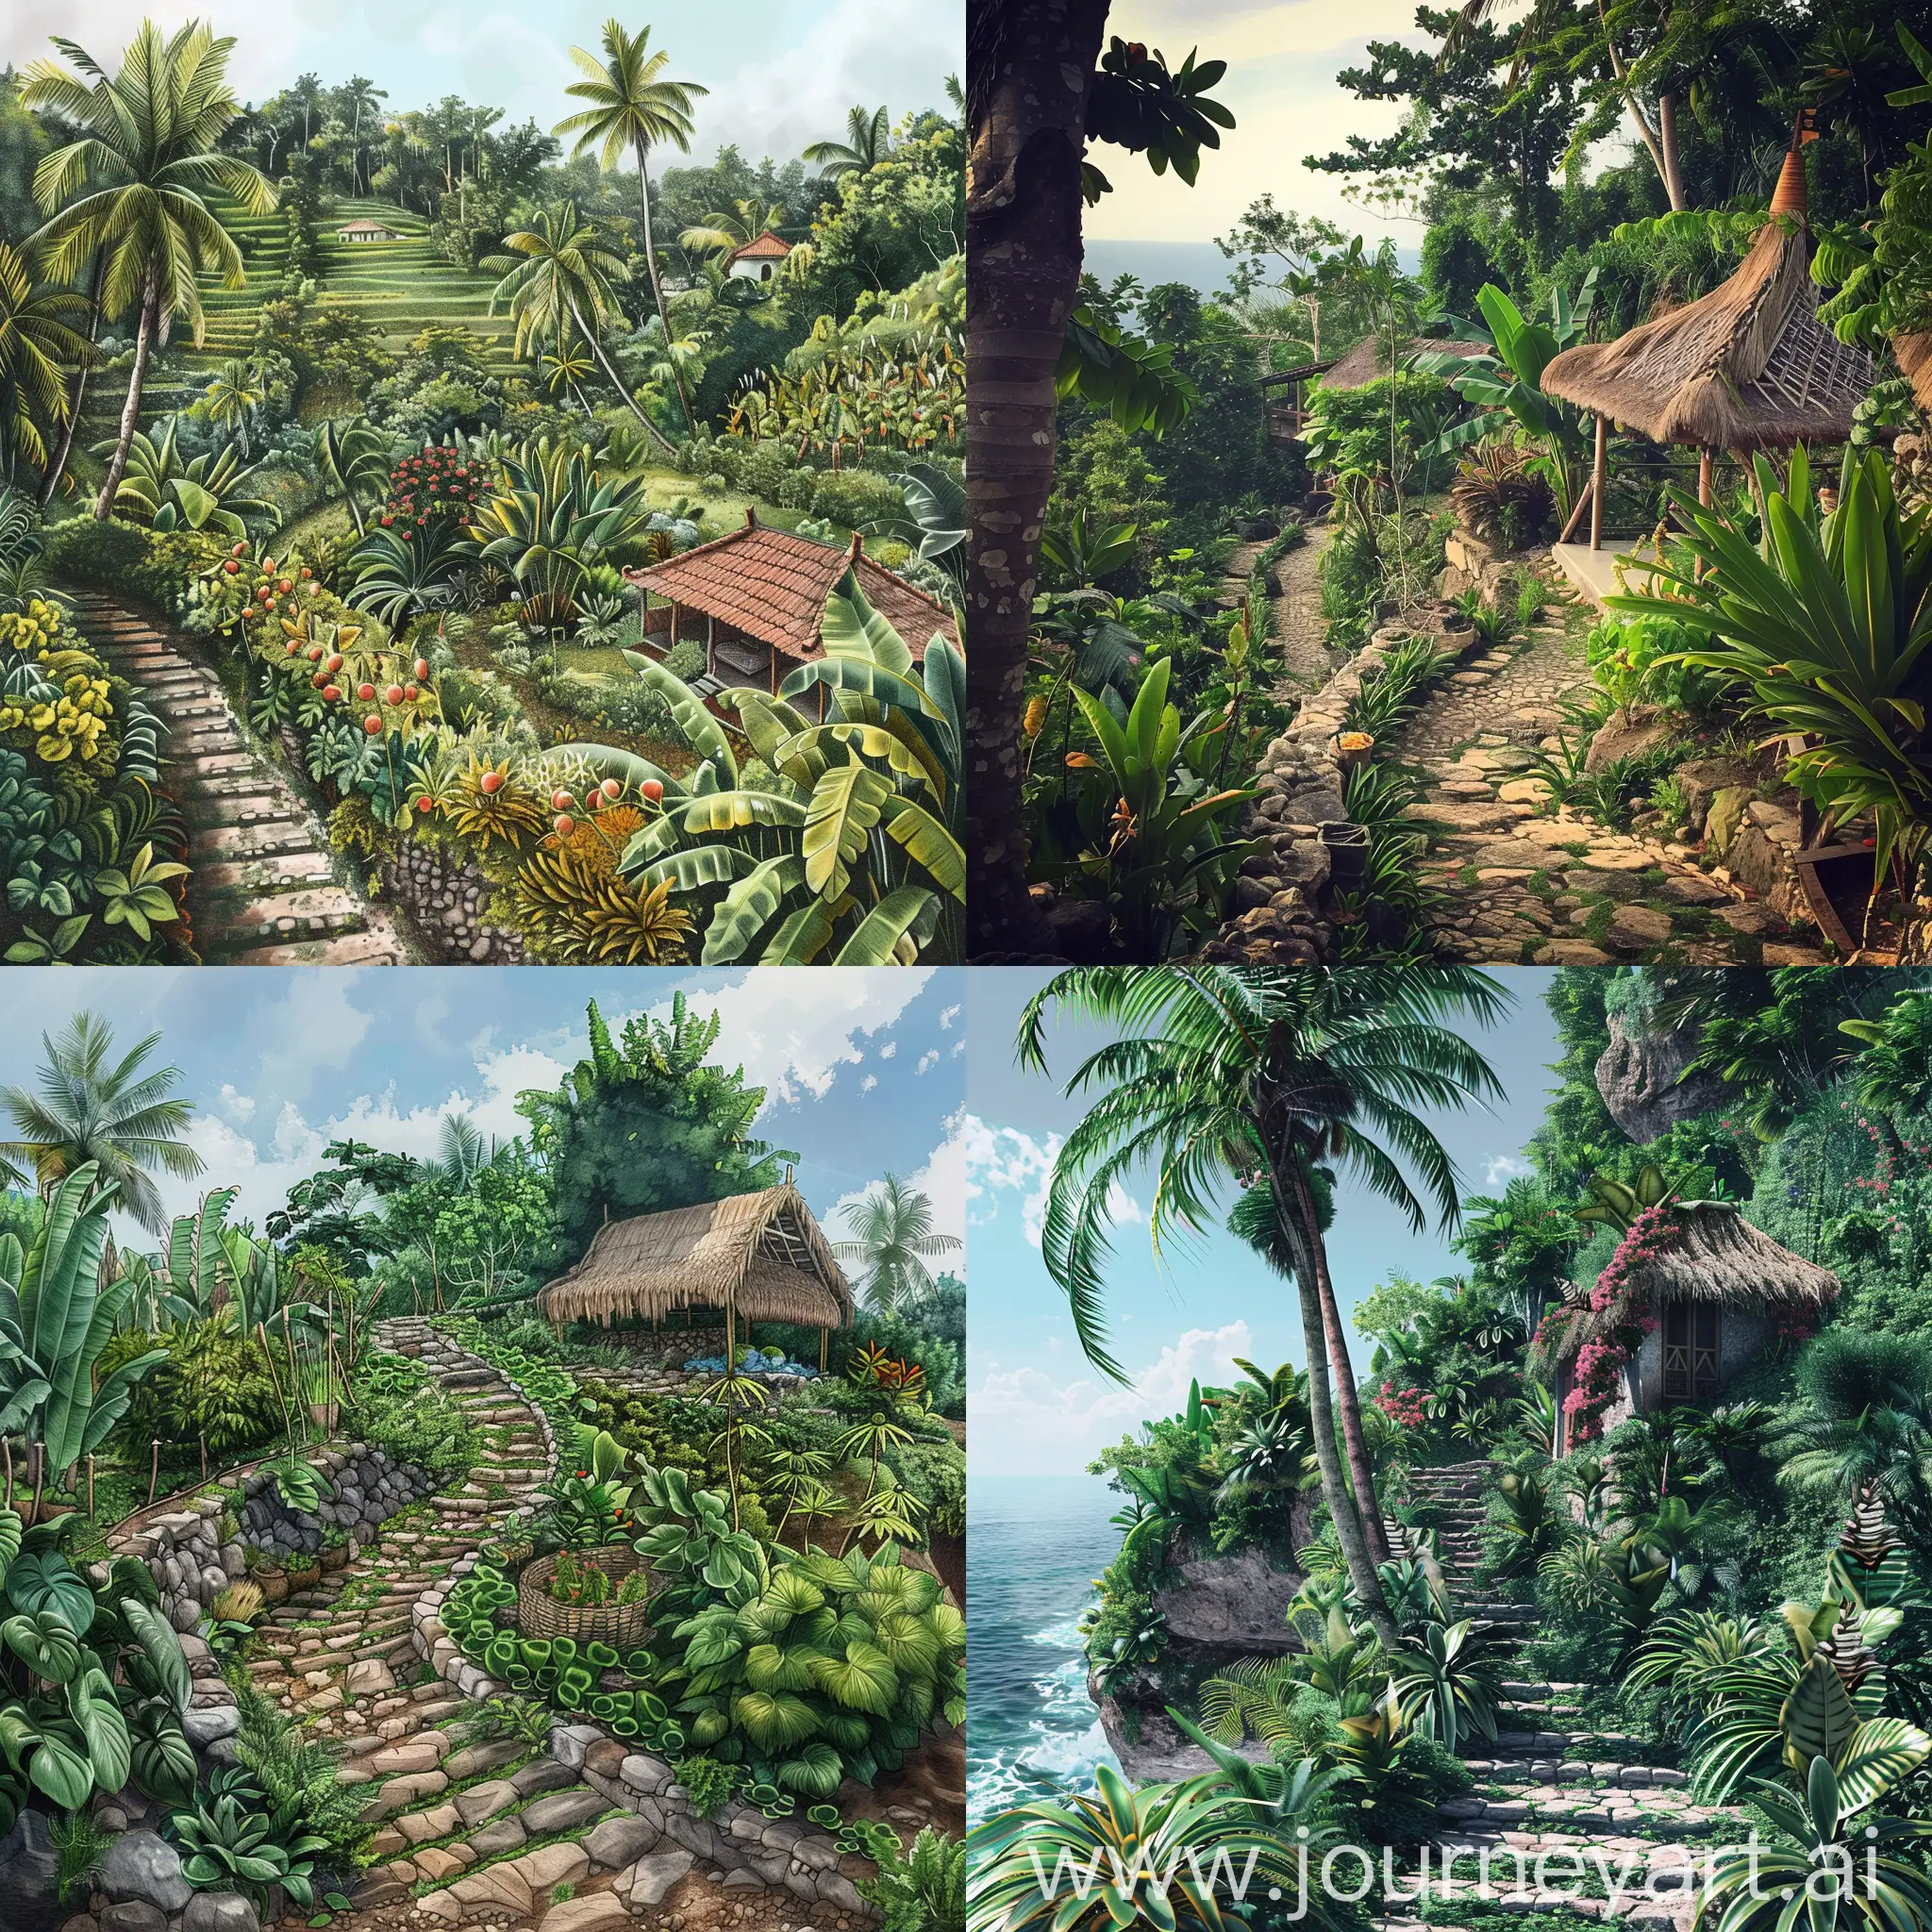 Stunning-Tropical-Garden-with-Edible-Plants-and-Traditional-Limasan-House-in-Nusa-Penida